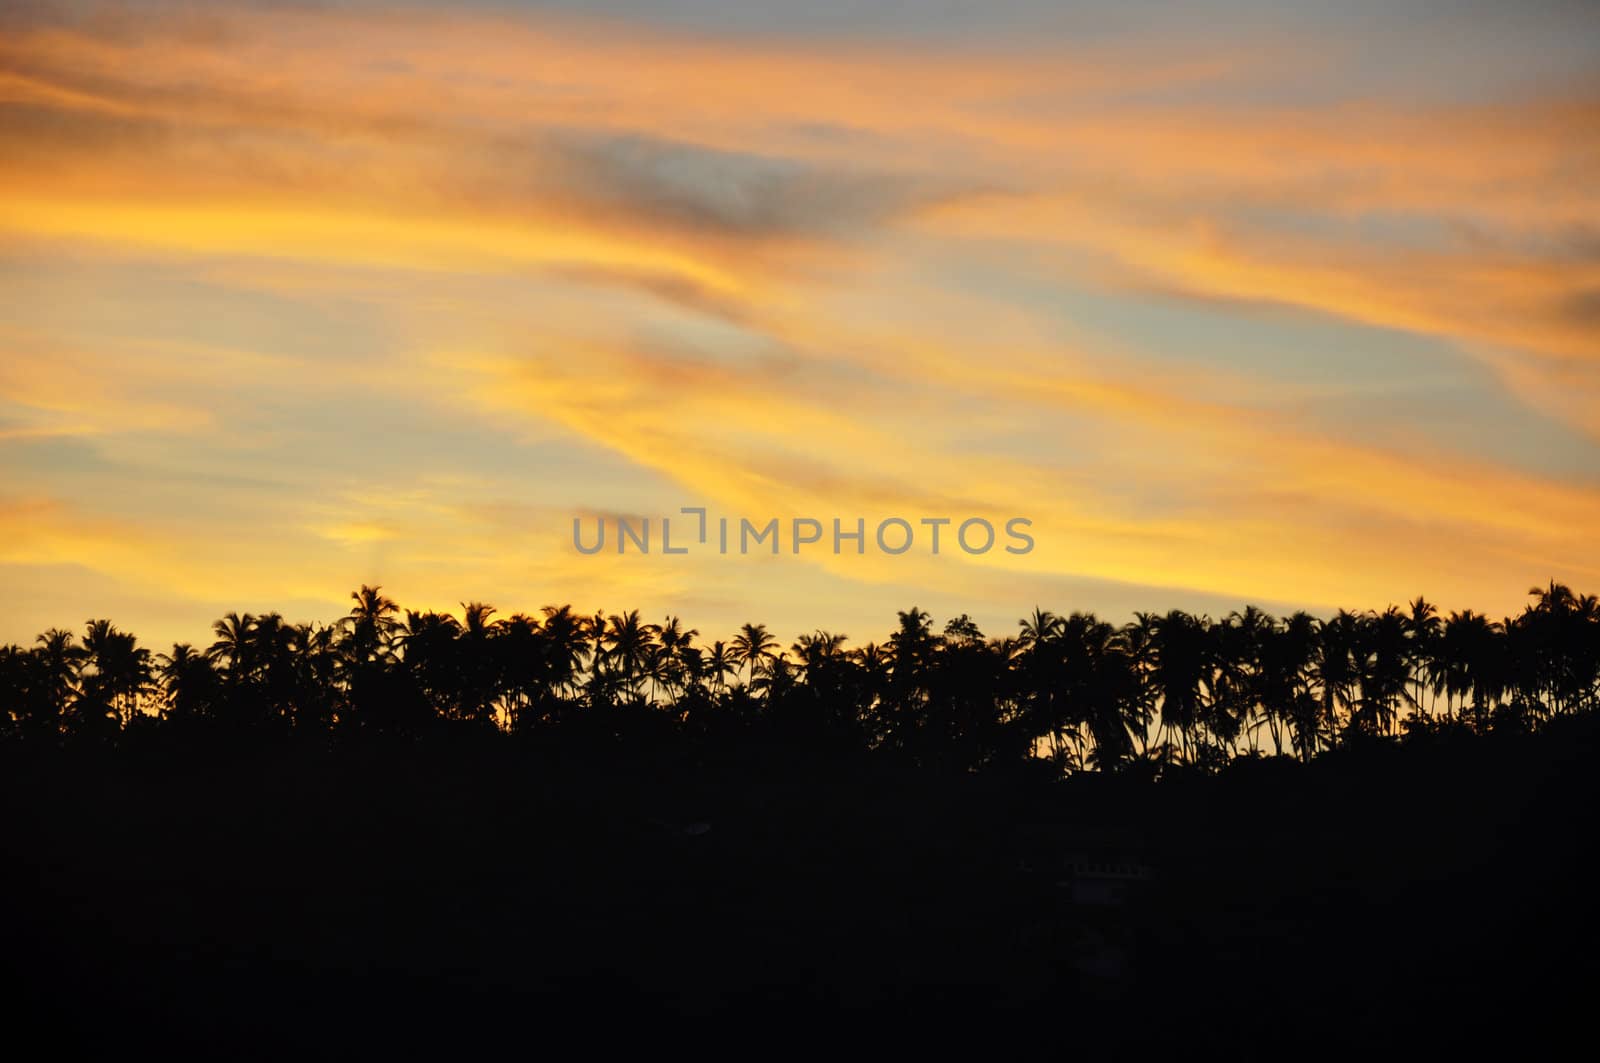 Silhouettes of Palm Trees against a dramatic sky at Sunset